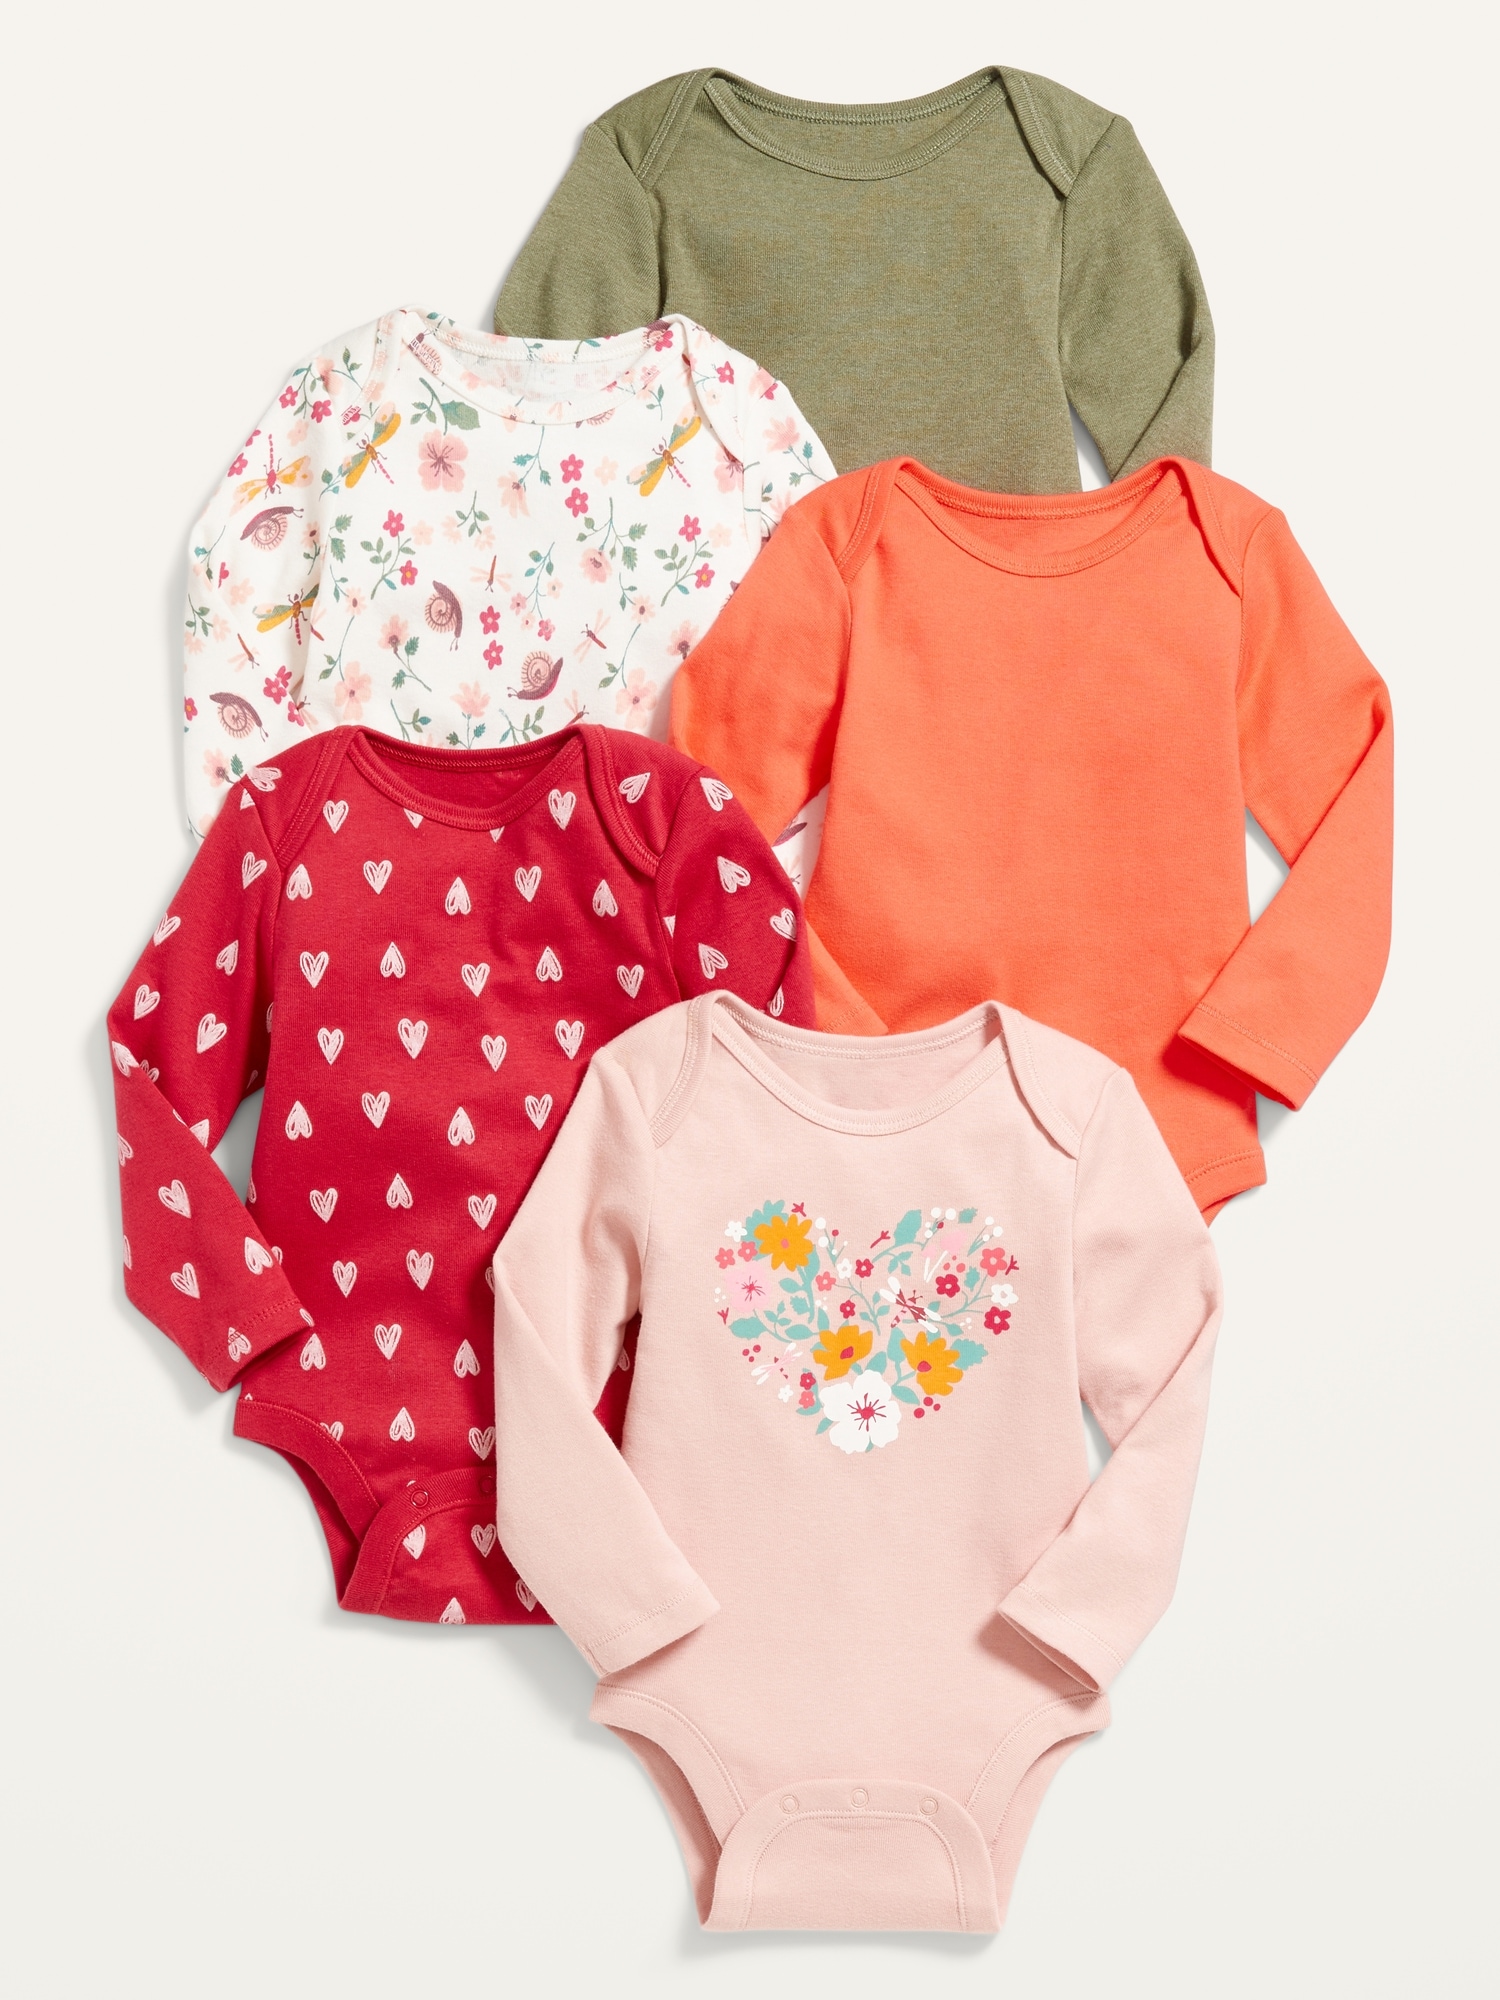 Carter's Baby Girls 4-Pack Printed Cotton Long Sleeve Bodysuits